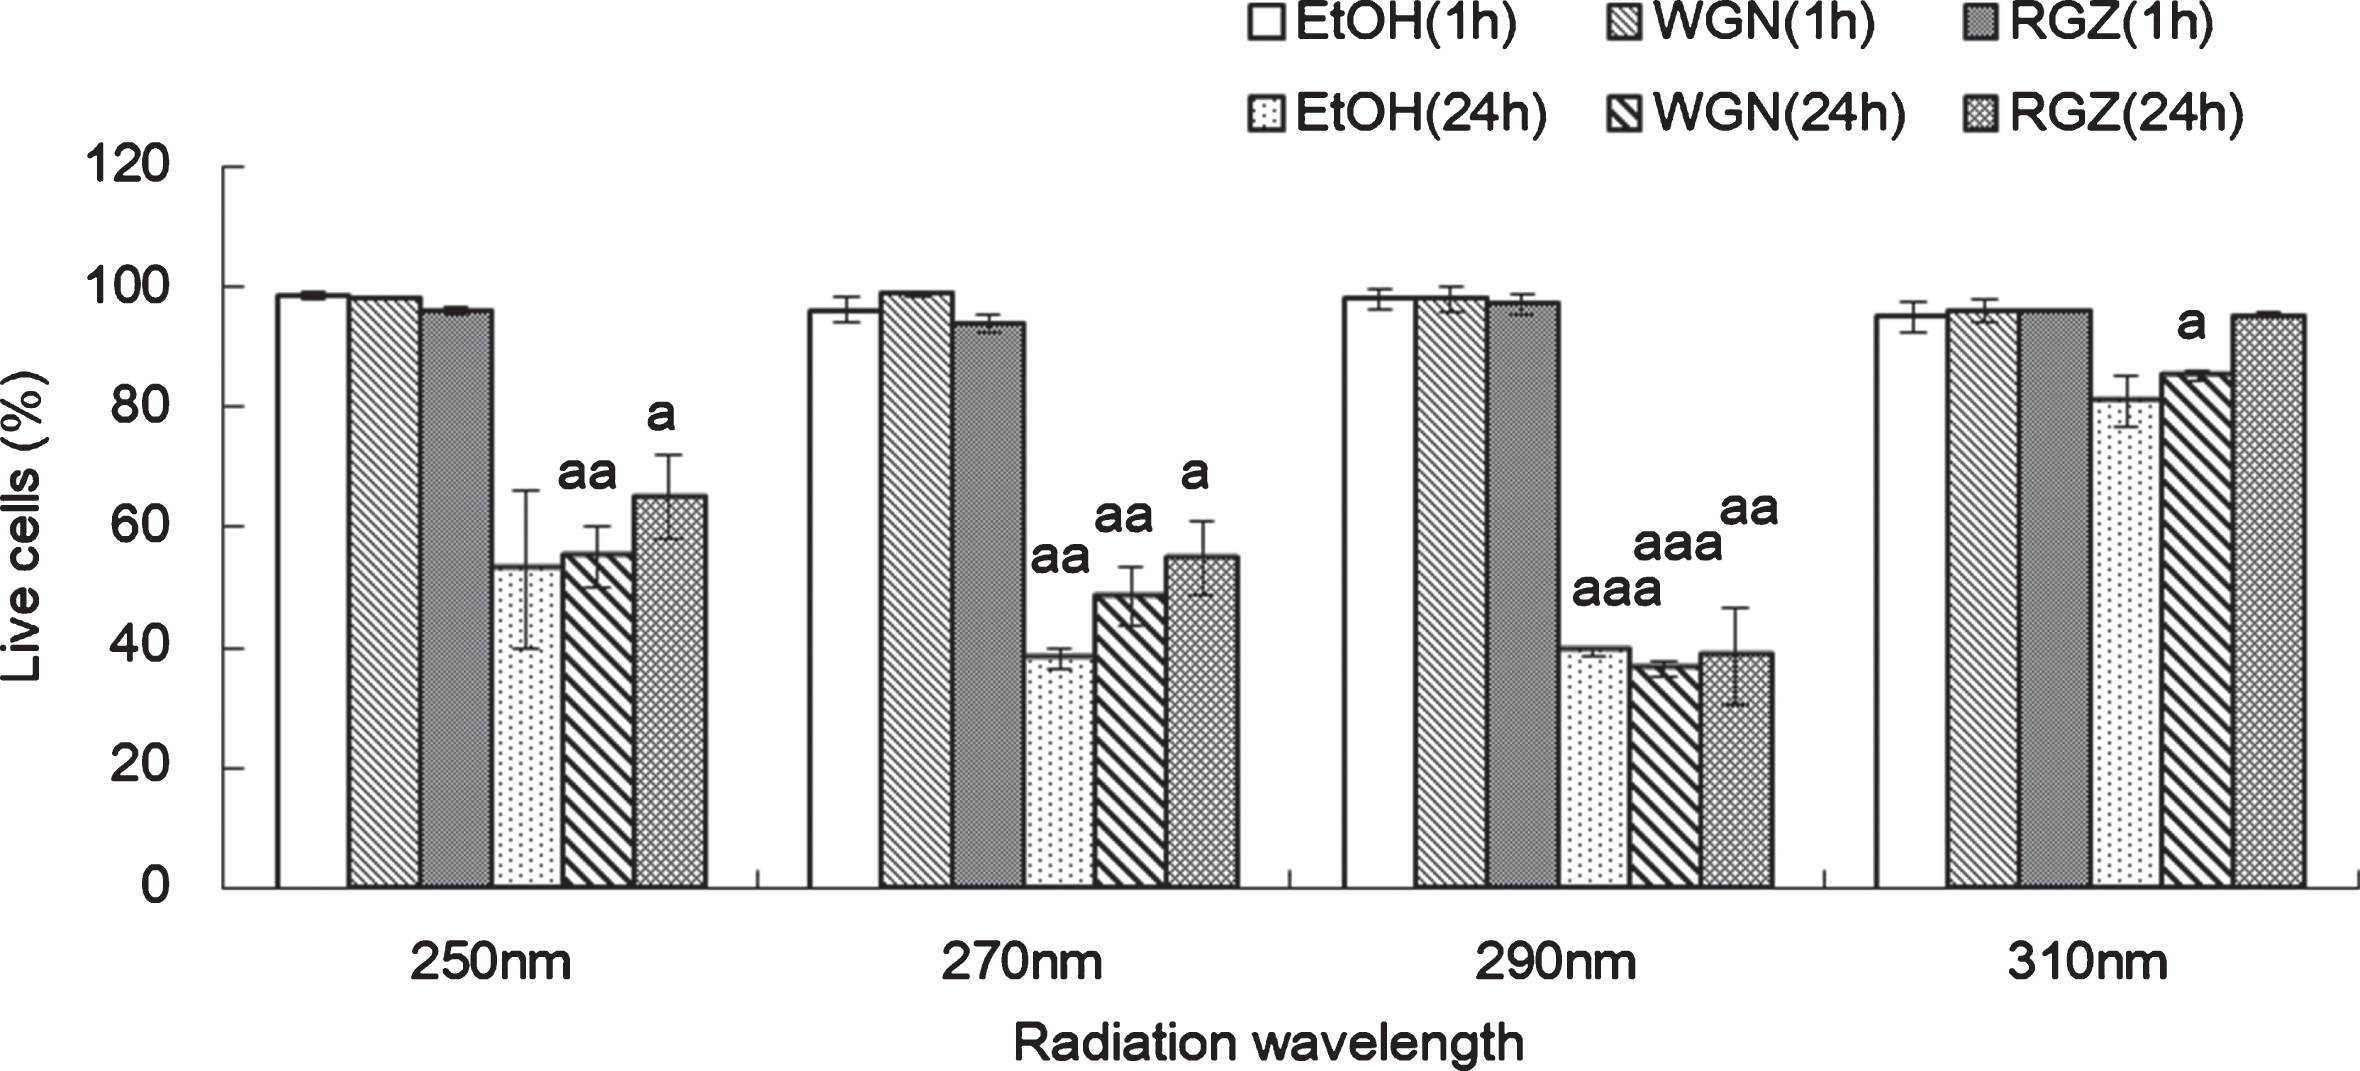 Viability of NHEK cells treated with ethanol, white grape skin Niagara (WGN) extract and red grape skin Zweigelt (RGZ) extract, incubated for 1 h/24 h after UV irradiation at different wavelengths (250 nm, 270 nm, 290 nm, and 310 nm). “a”, “aa” and “aaa” denote significant change between 1 h and 24 h in each EtOH, WGN, and RGZ, and mean p < 0.05, p < 0.01, and p < 0.001, respectively. In control group treated without UV, ethanol was added instead of GSE. GSEs were obtained as described in method 1, section 2.2. Error bars indicate SEM (n = 3).